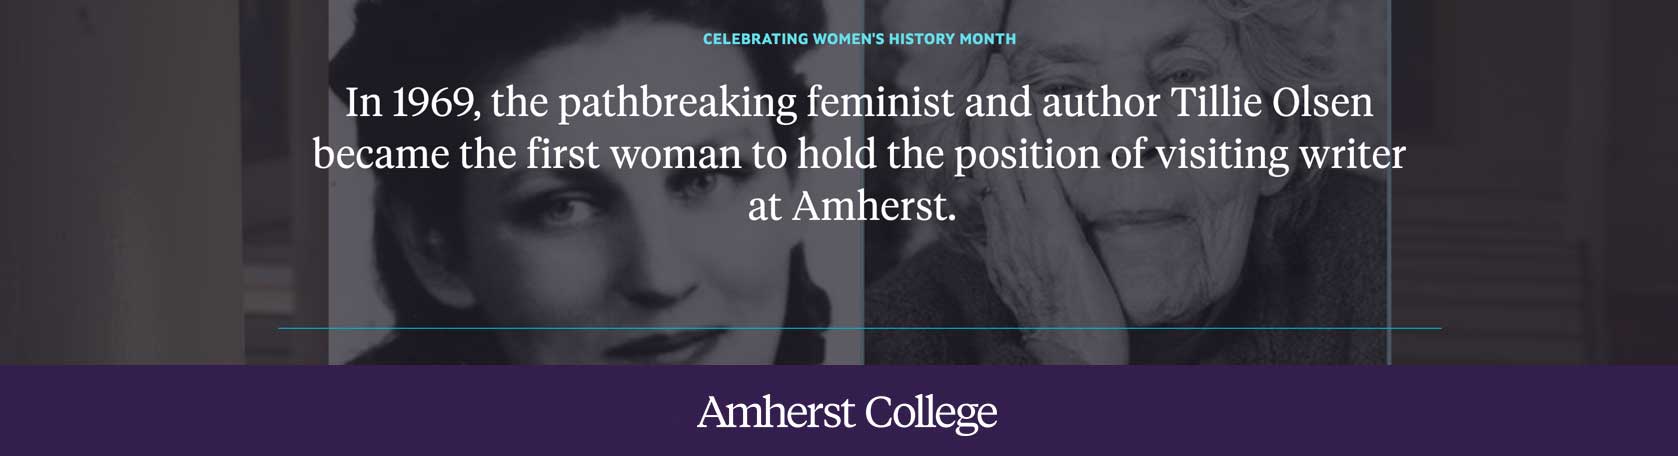 in 1969 Tillie Olsen became the first woman to hold the position of visiting writer at Amehrst